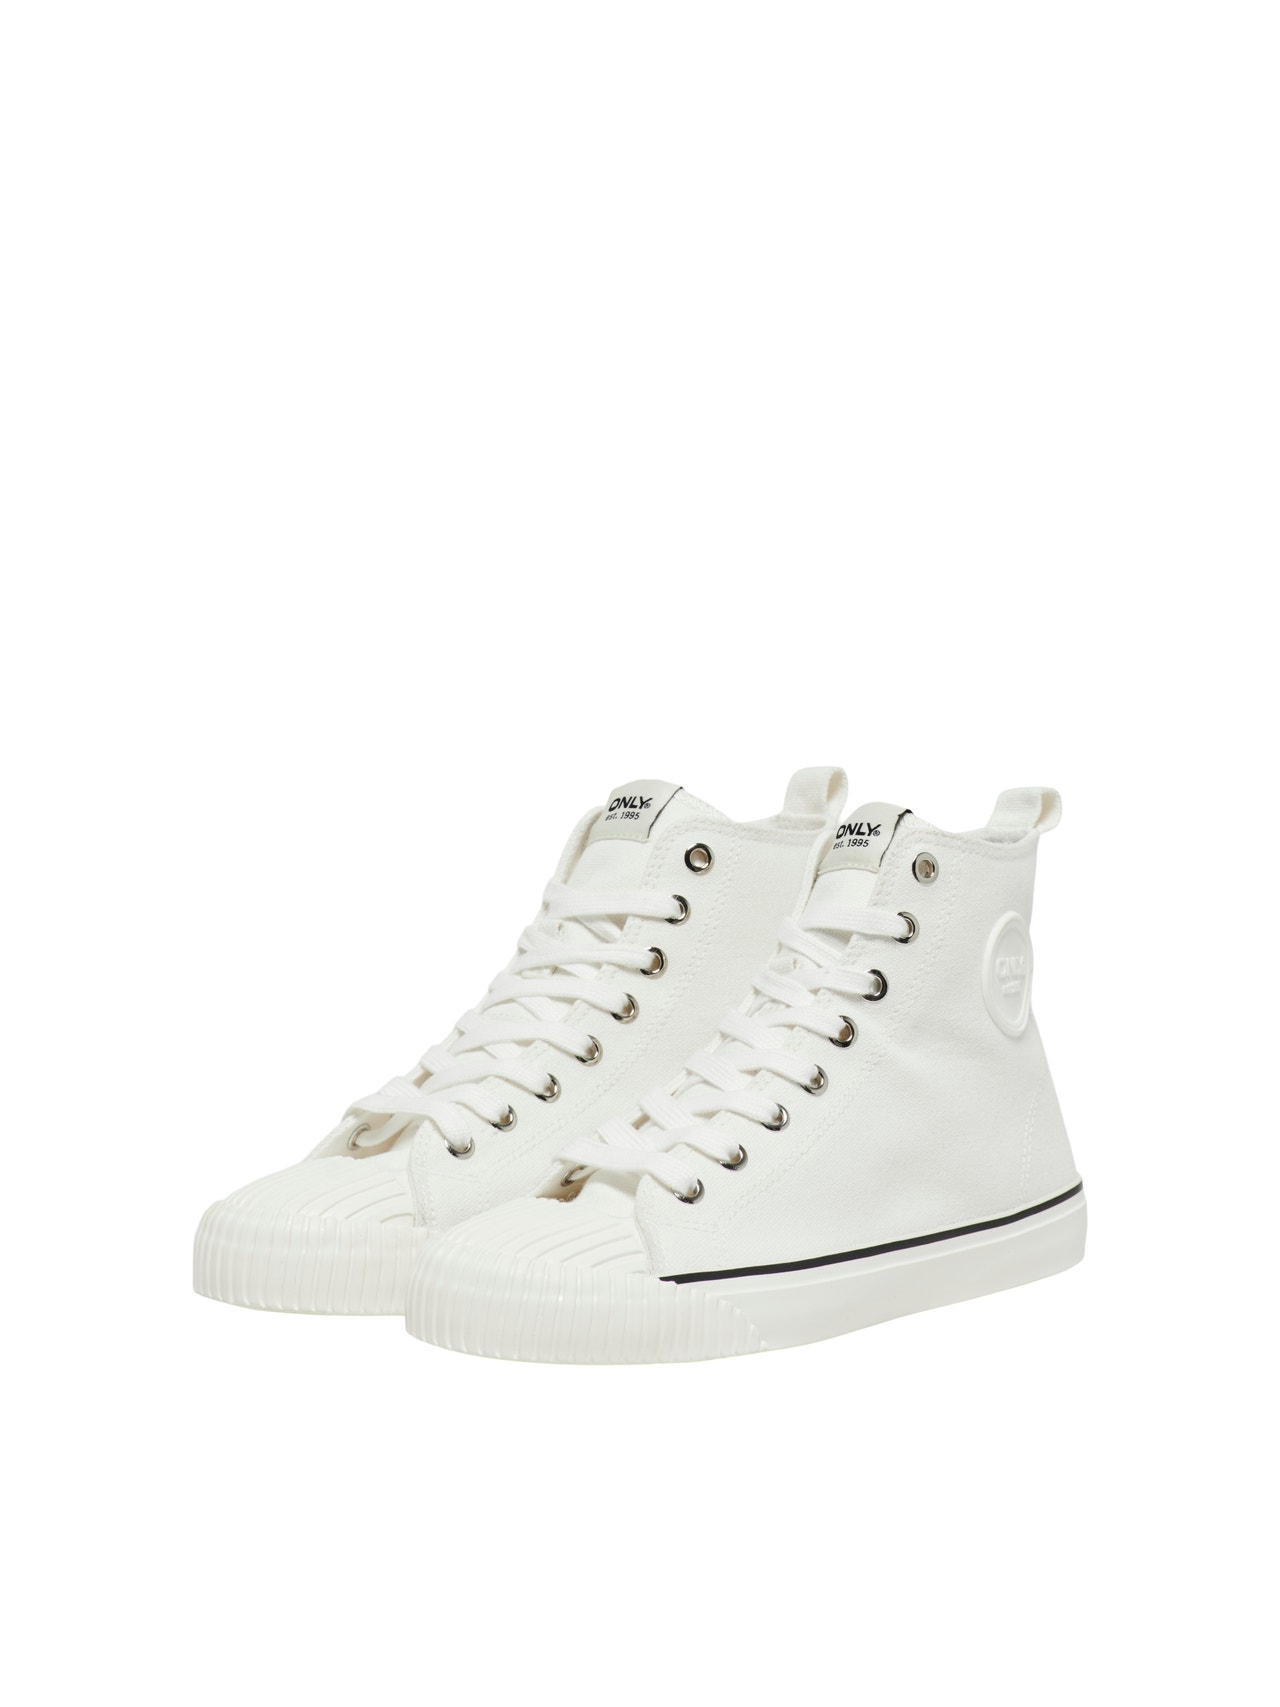 ONLY Canvas Sneaker -White - 15304530